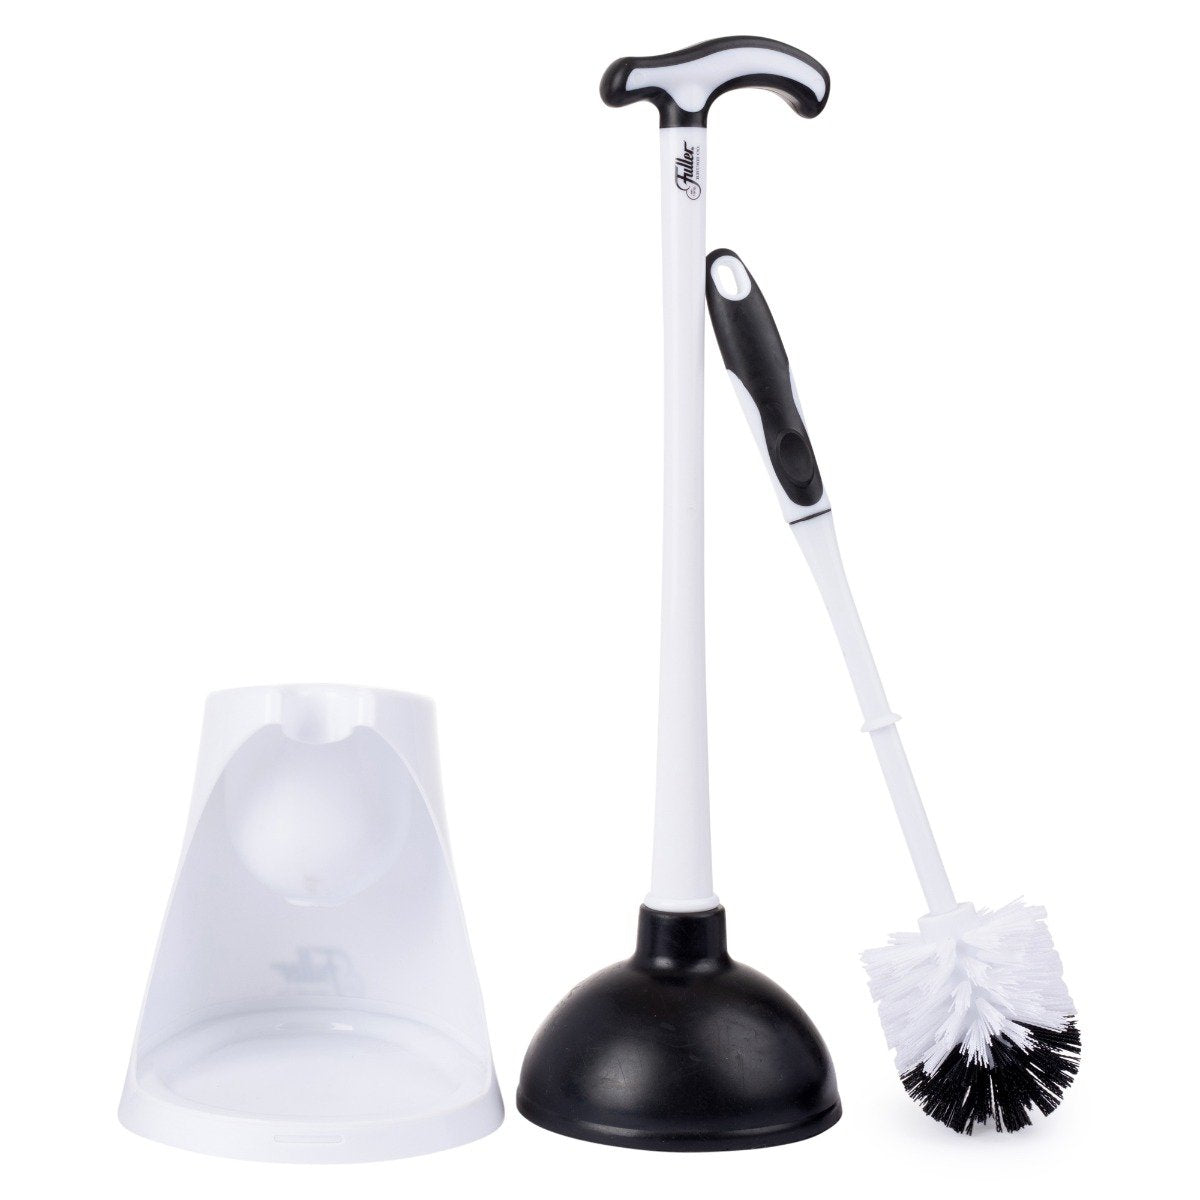 Premium Bowl Brush & Plunger in Caddy Set-Cleaning Brushes-Fuller Brush Company